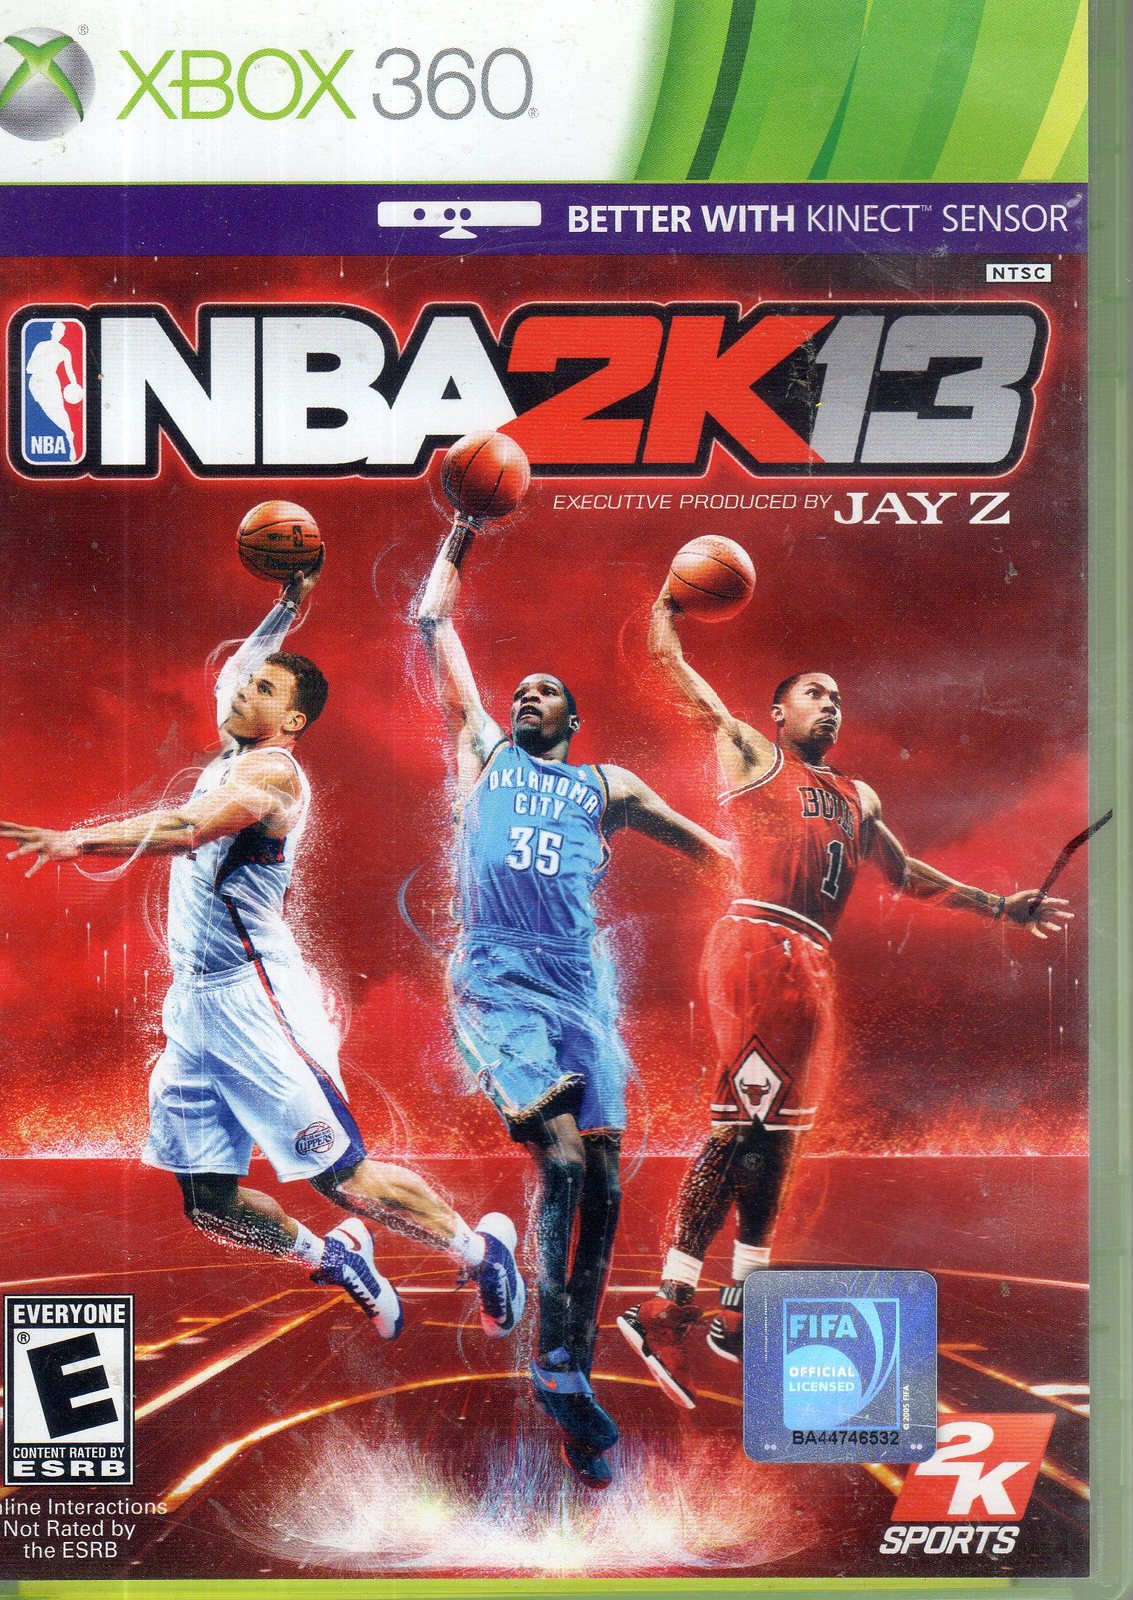 Primary image for XBOX 360 - NBA 2K13 (Complete with Manual) 